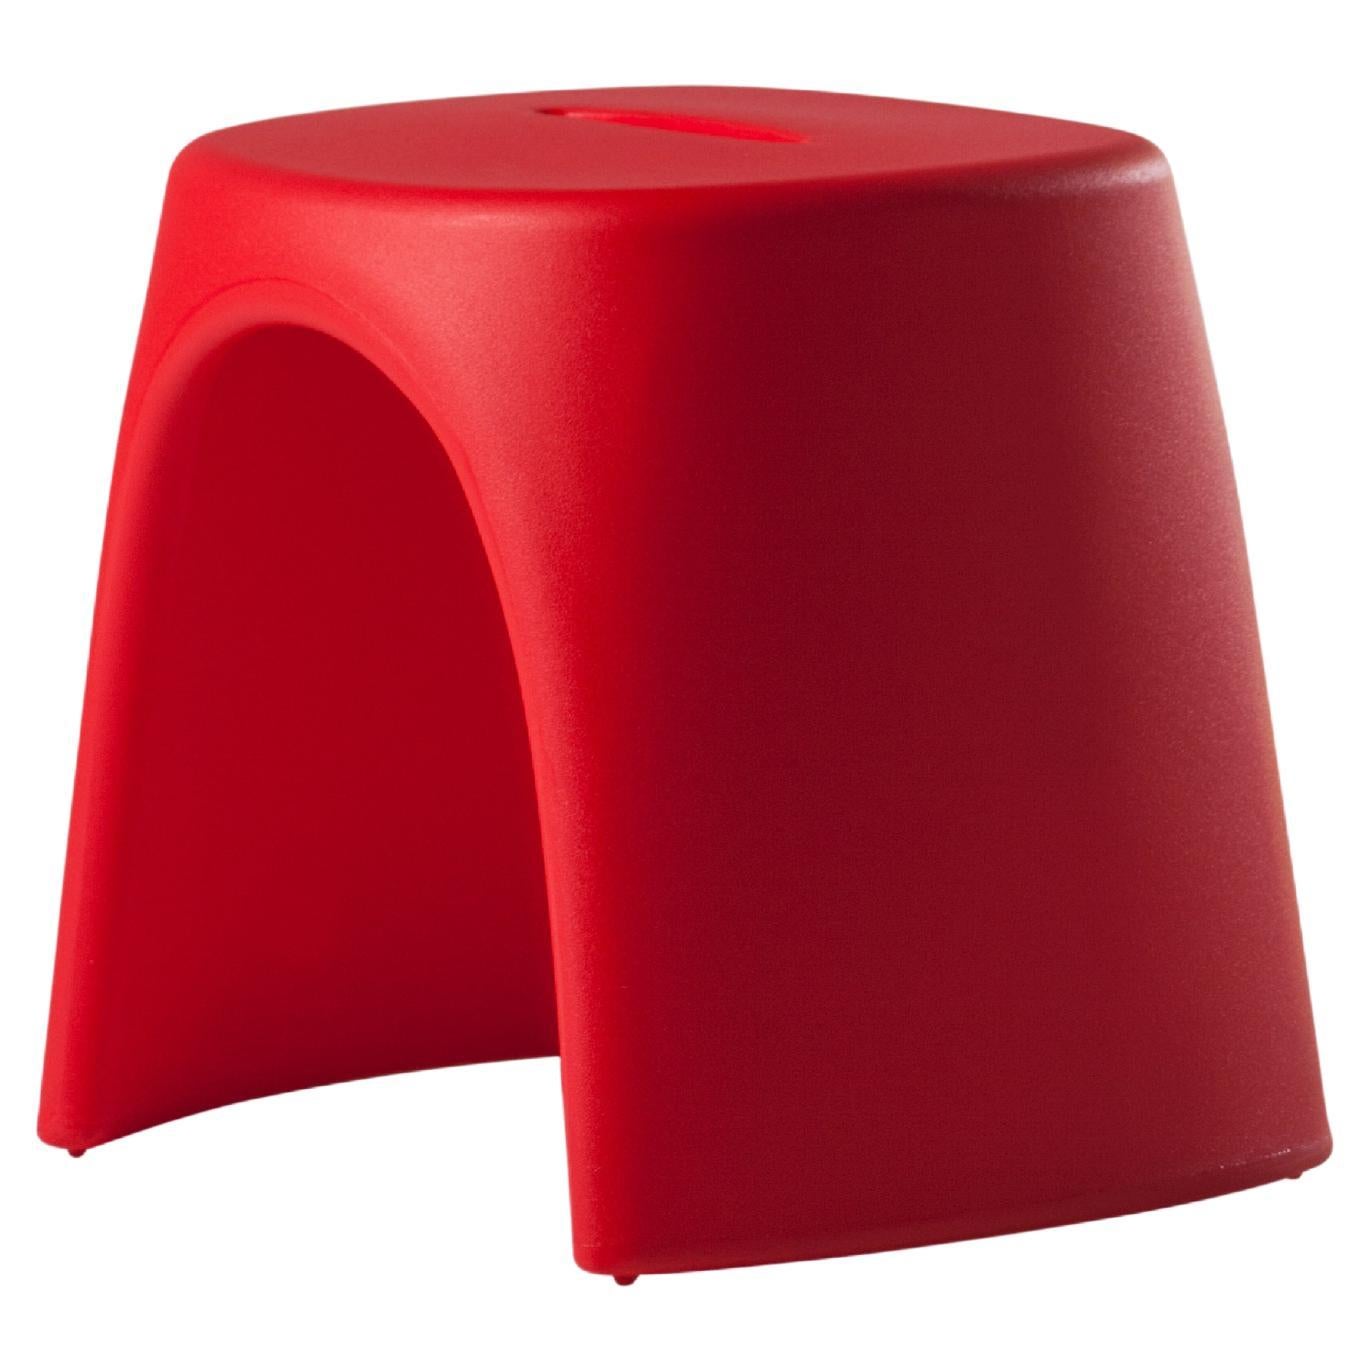 Slide Design Amélie Sgabello Stool in Flame Red by Italo Pertichini